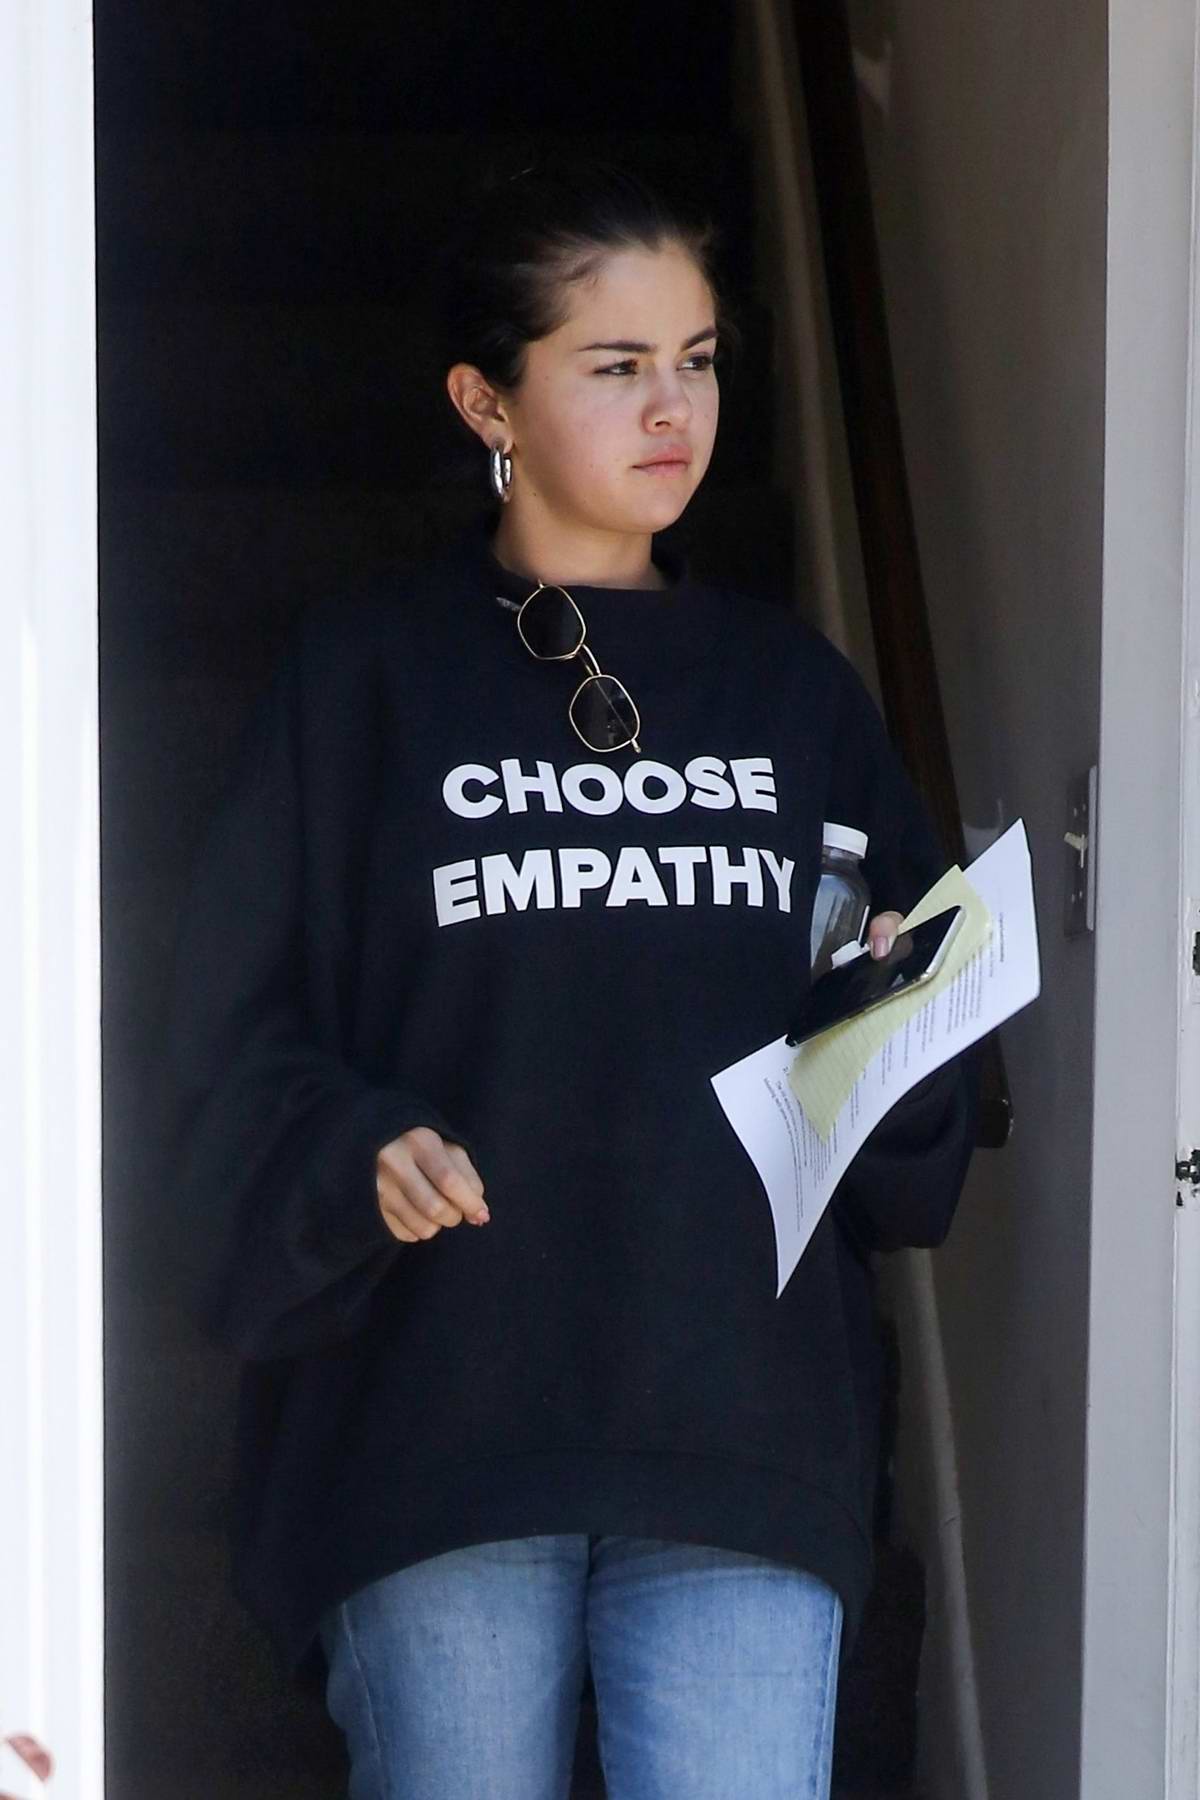 selena gomez spotted leaving the doctor's office wearing a 'choose ...